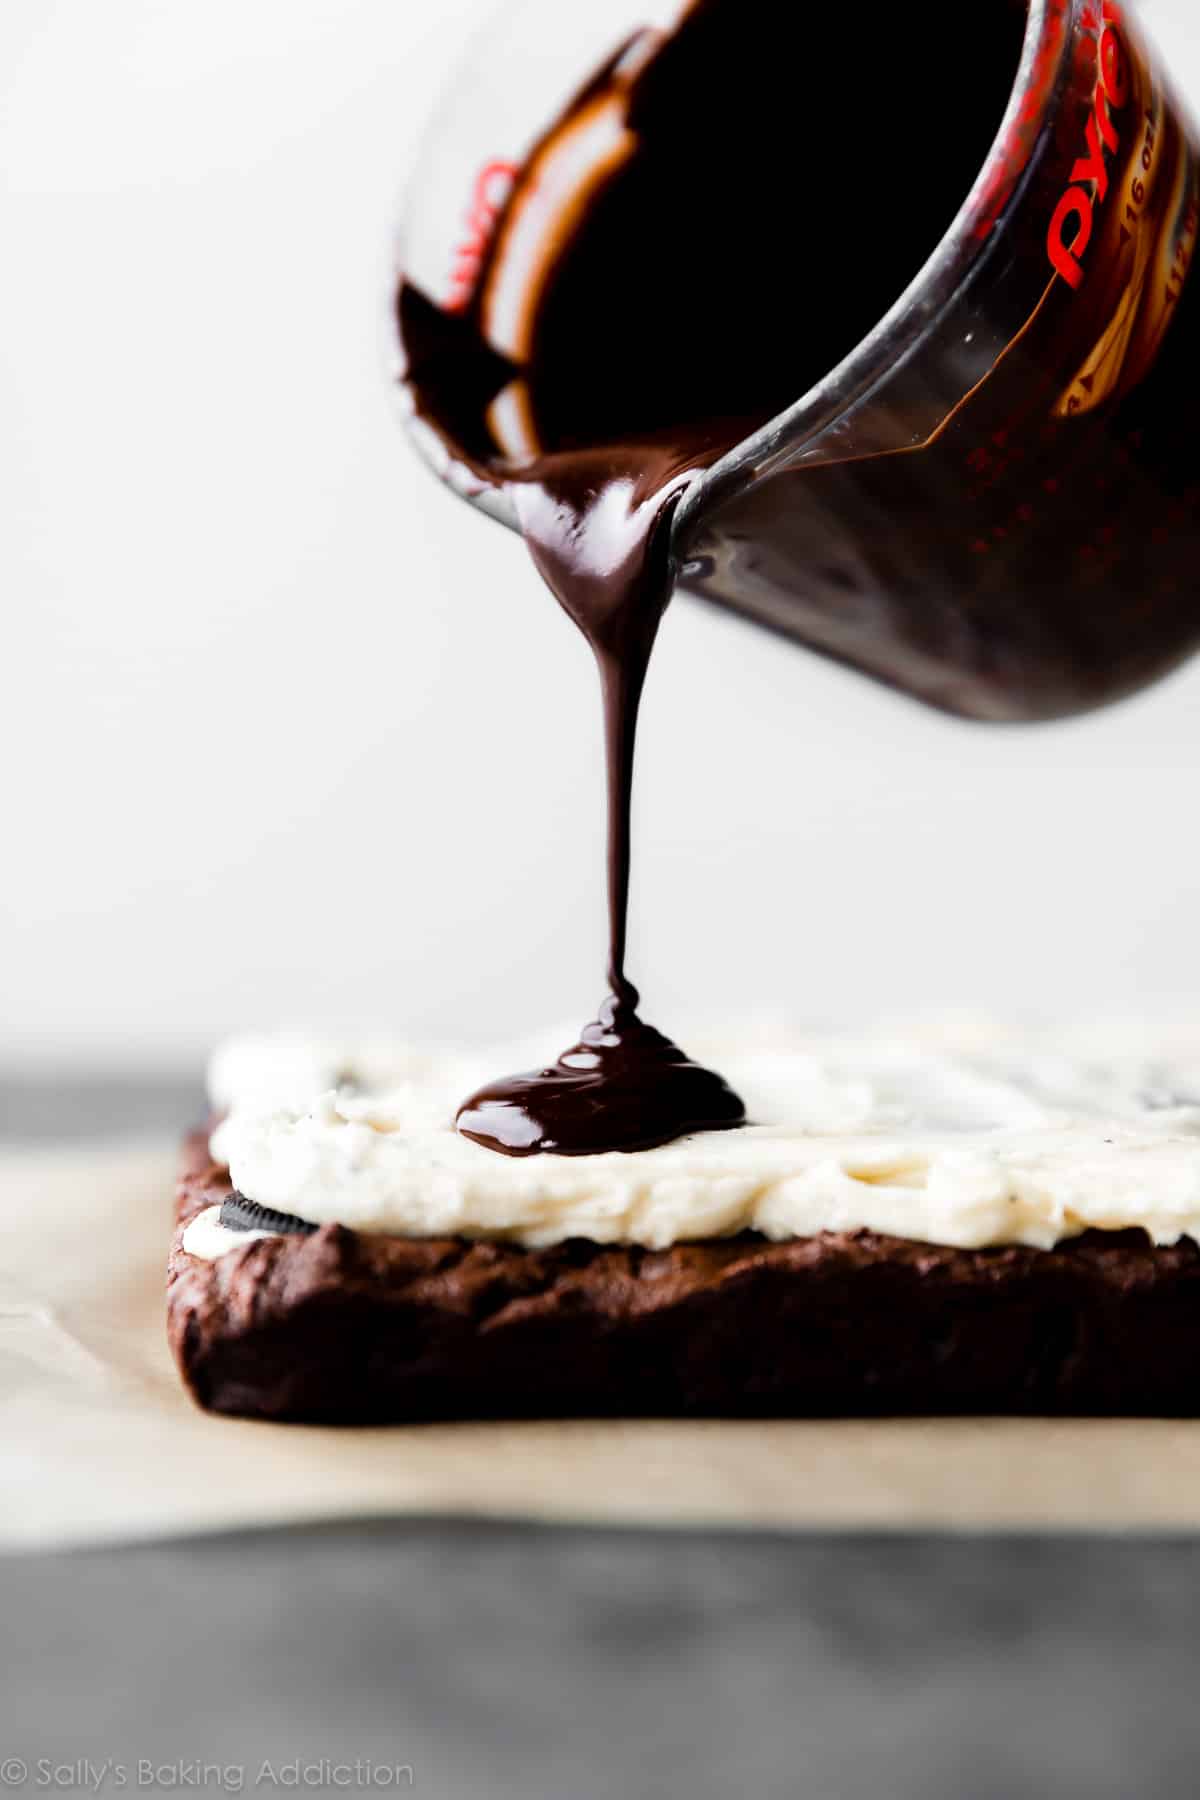 Pouring chocolate topping on brownies